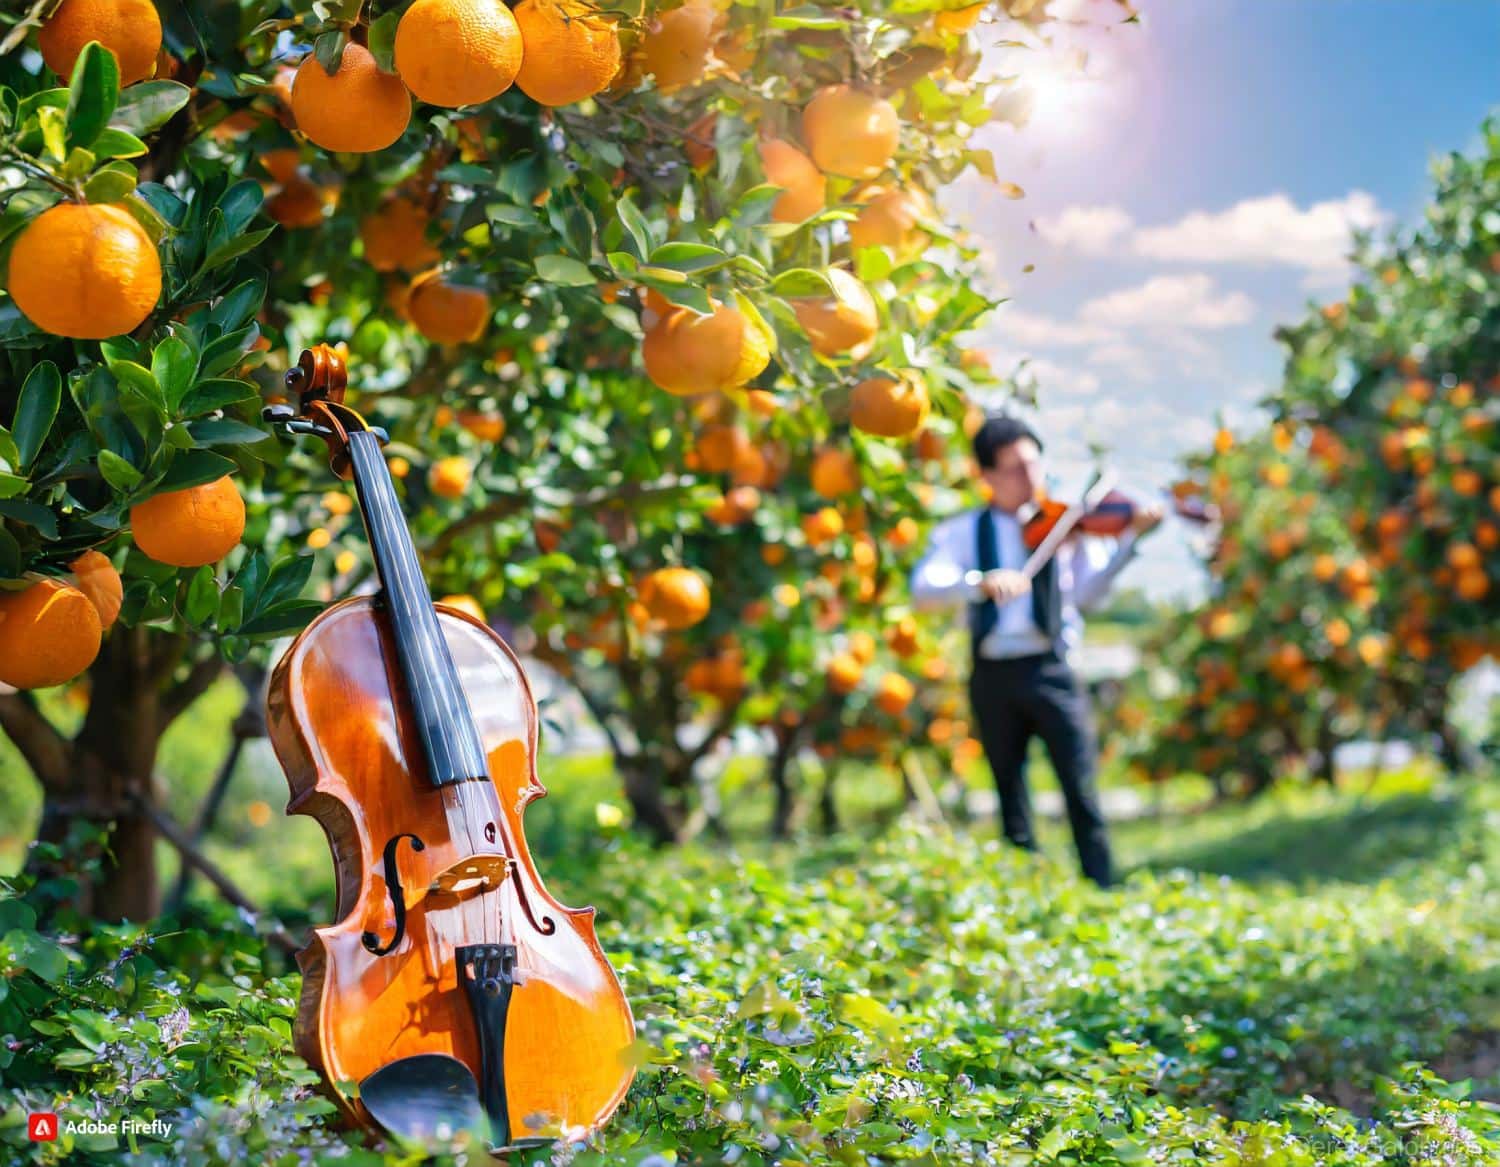 Firefly-orange-orchard-full-of-fruit-on-a-sunny-day.-far-in-background-a-classical-violinist-playing